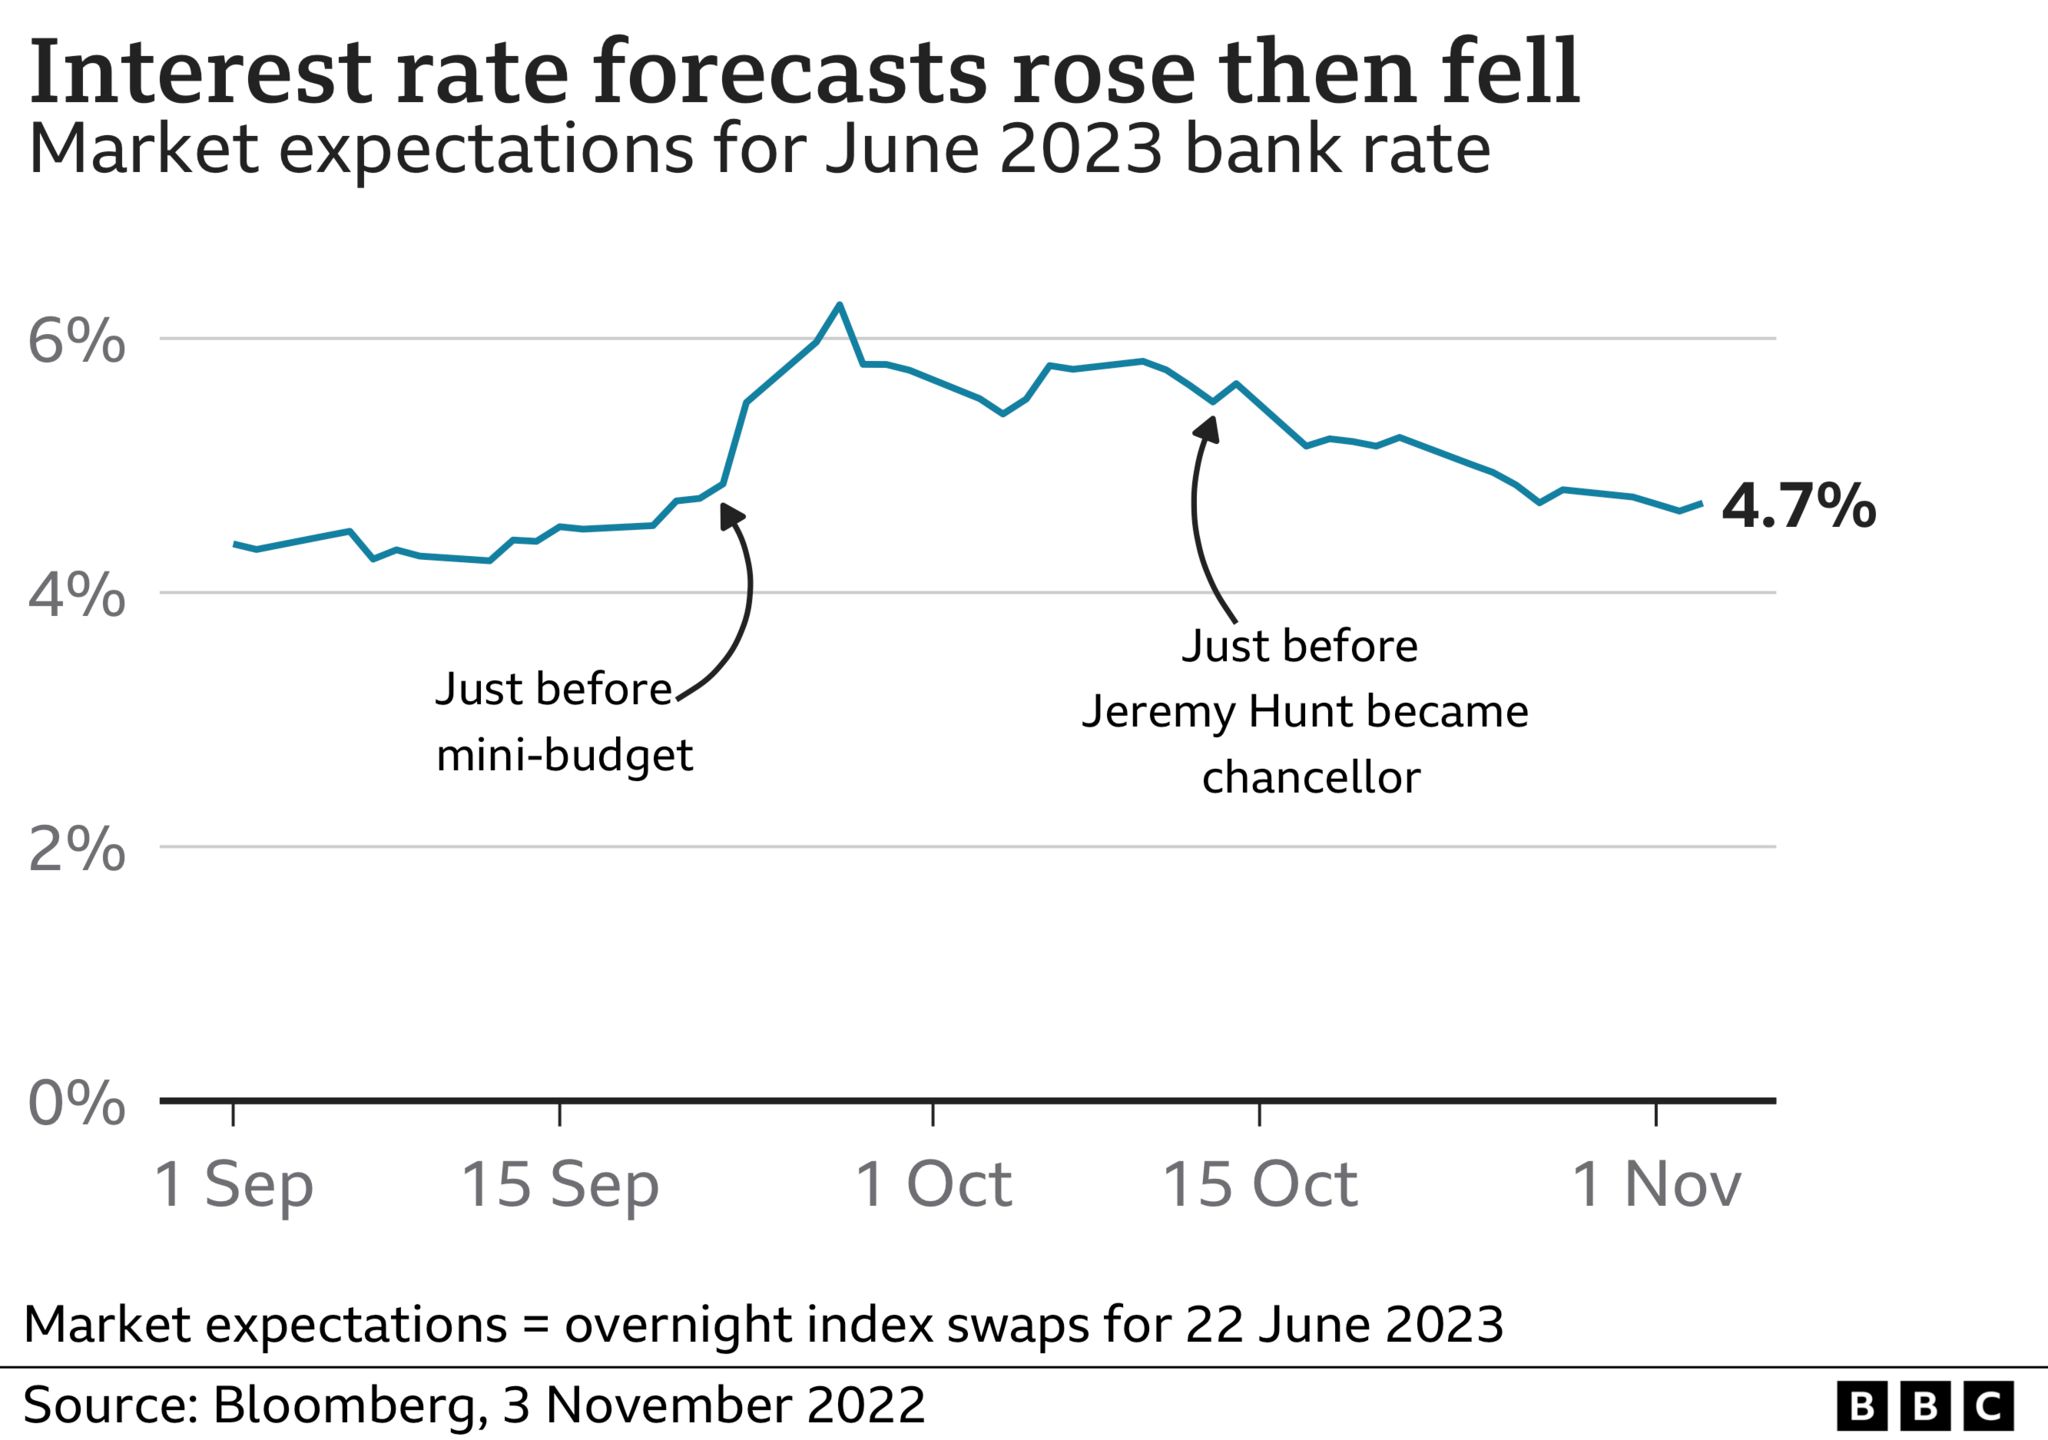 Line chart showing market expectations for the Bank of England's base rate of interest